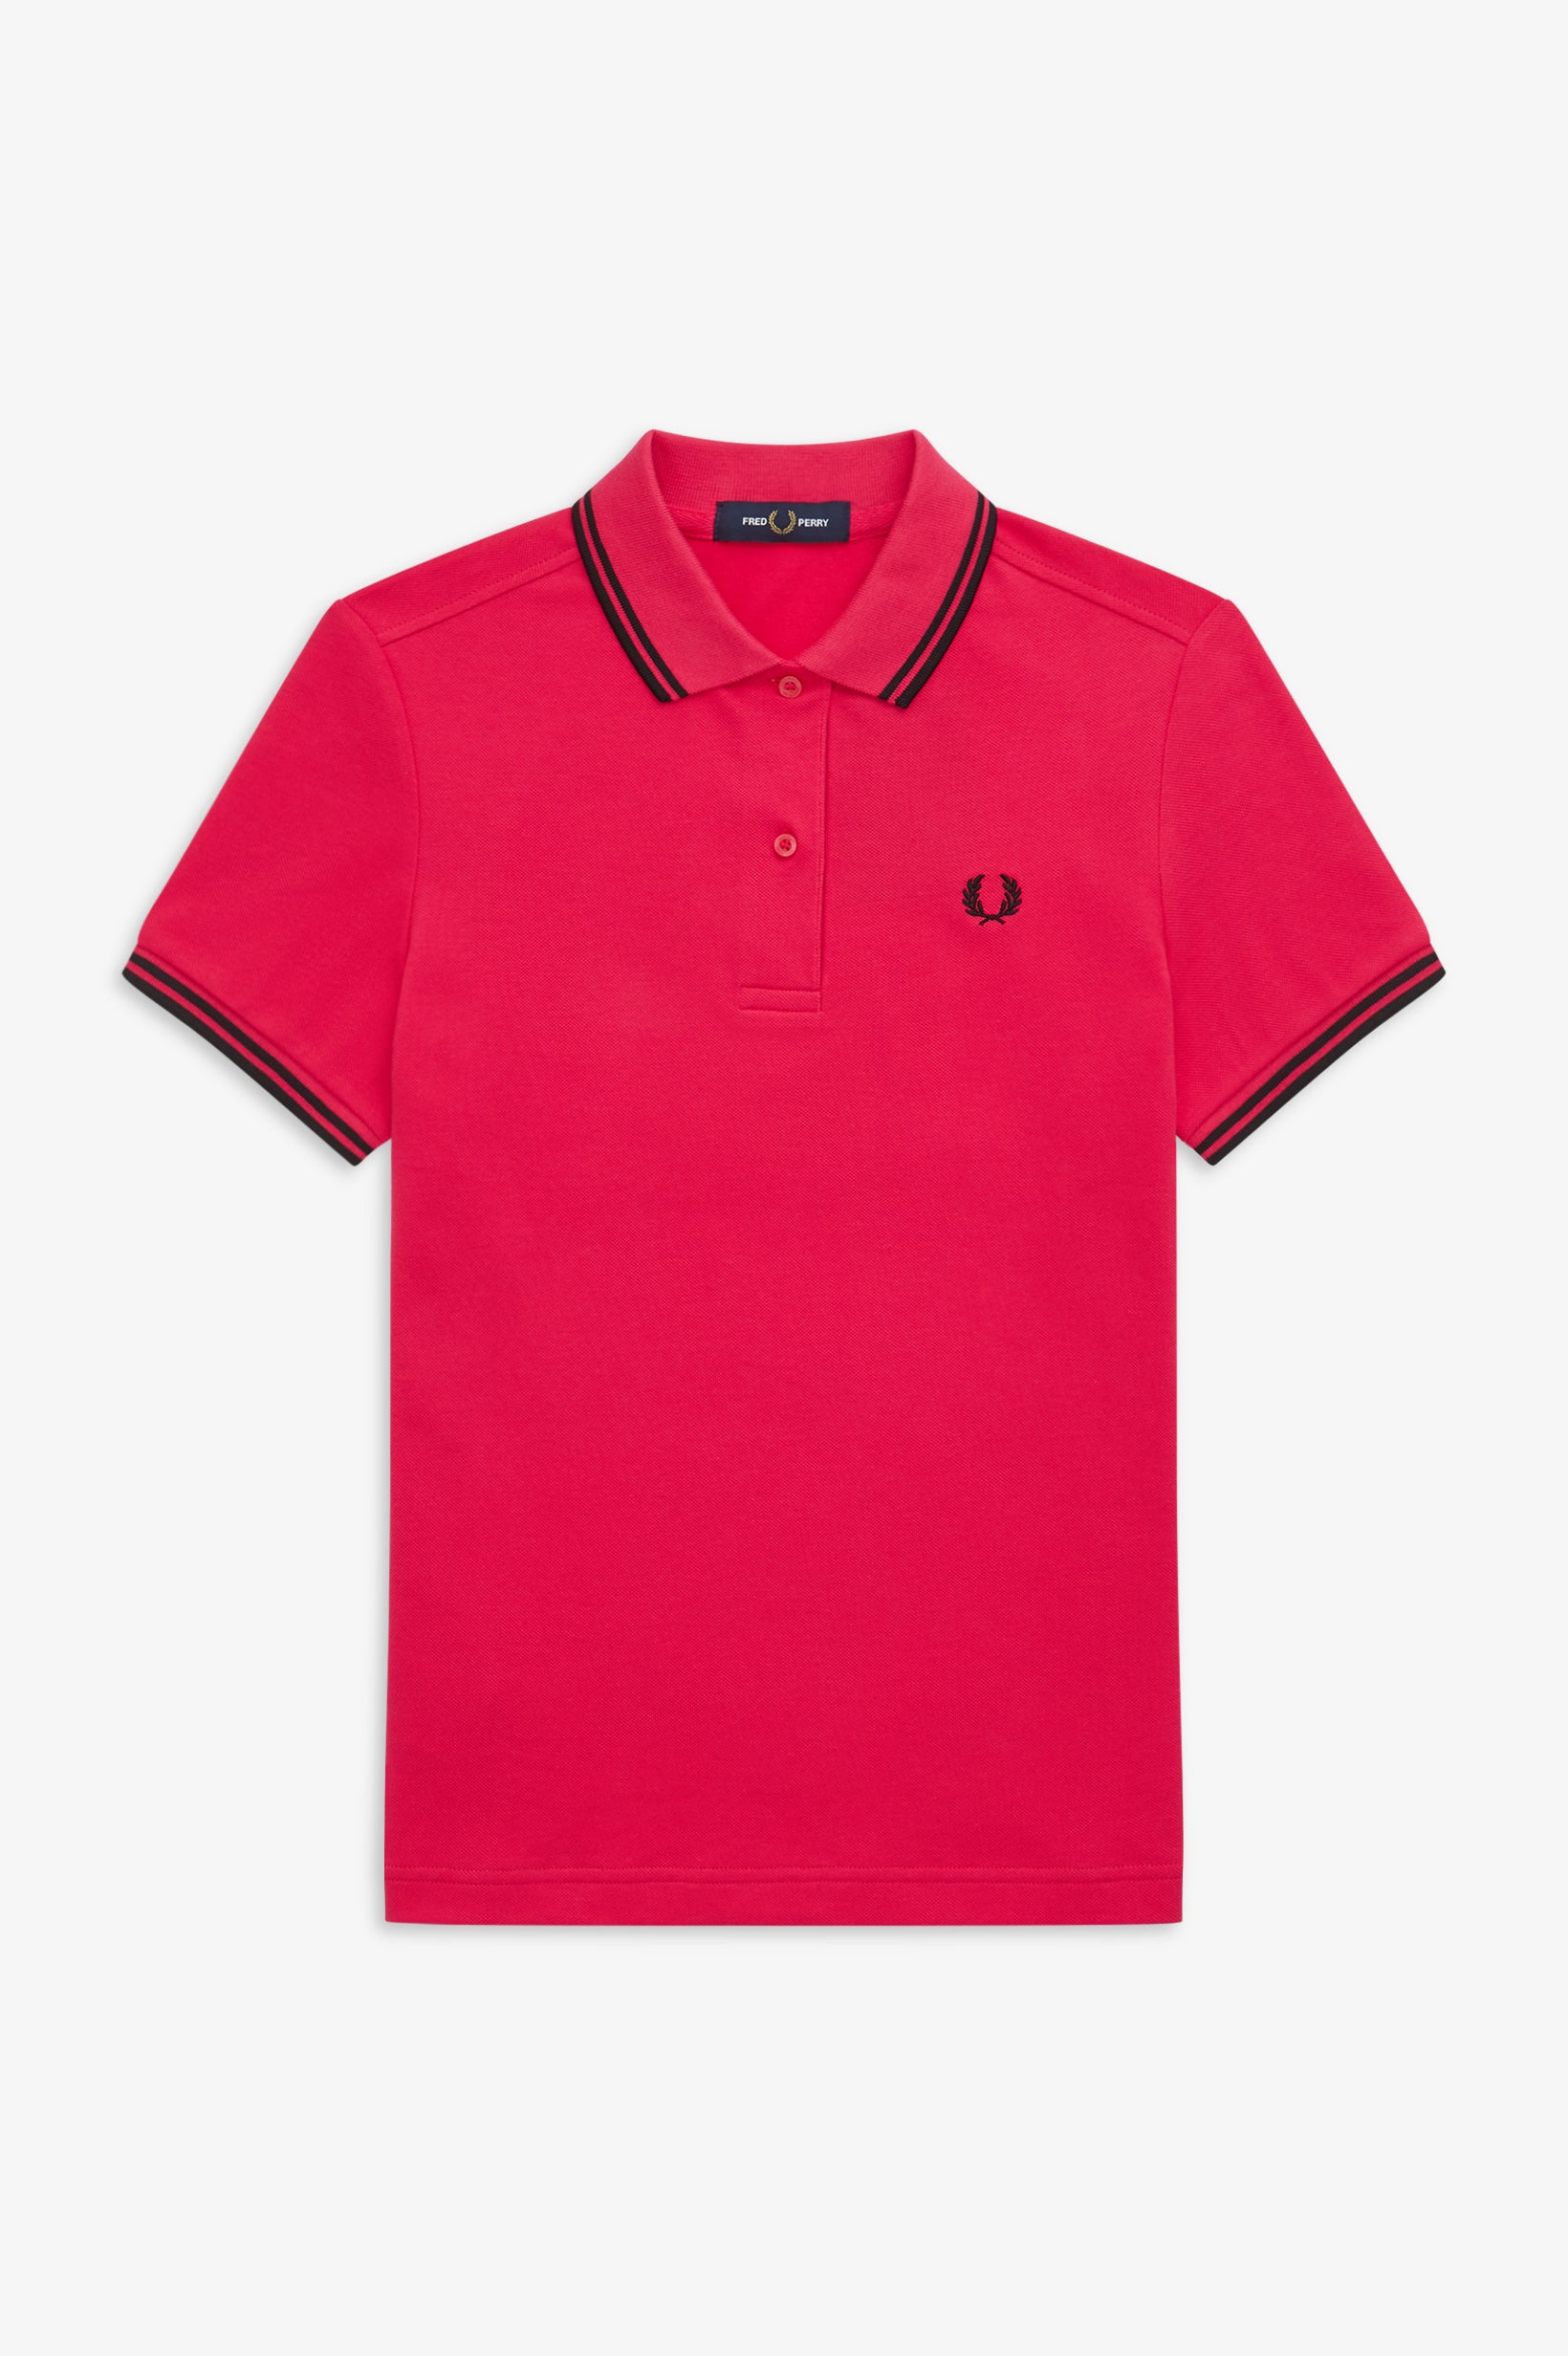 LADIES TWIN TIPPED FRED PERRY SHIRT (LOVE POTION/BLACK) – Posers